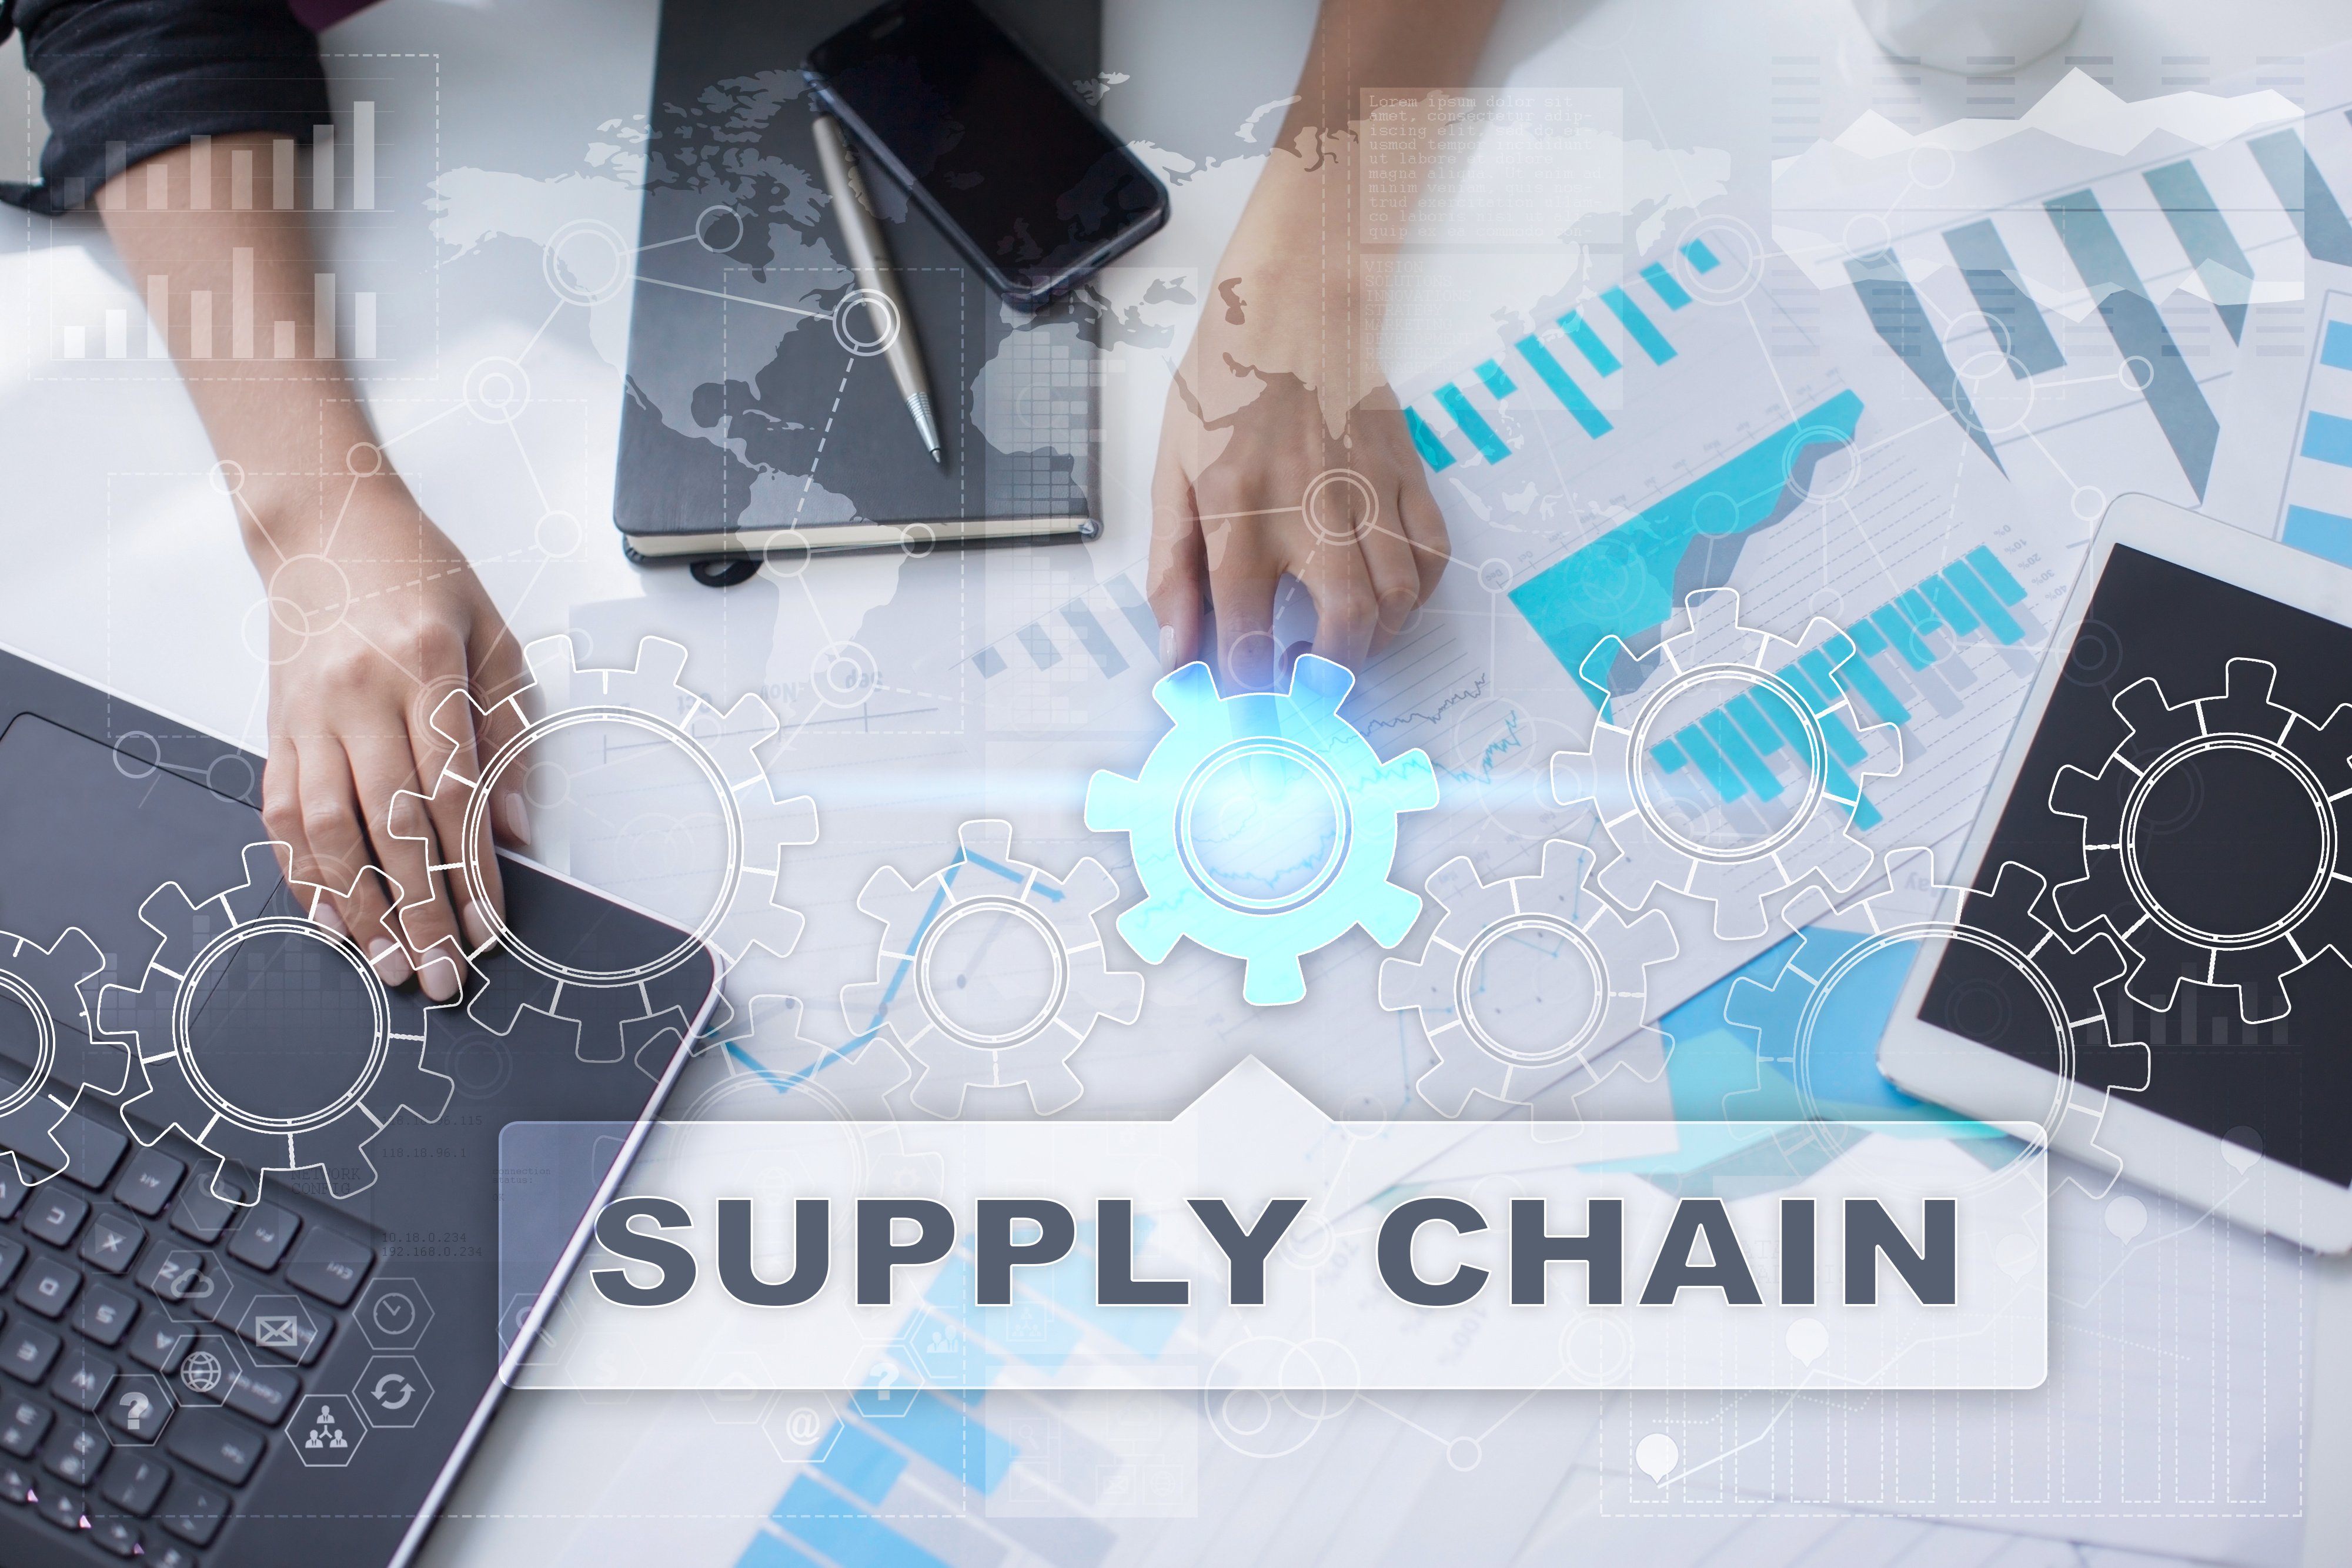 What Is Supply Chain & Why is It Important?